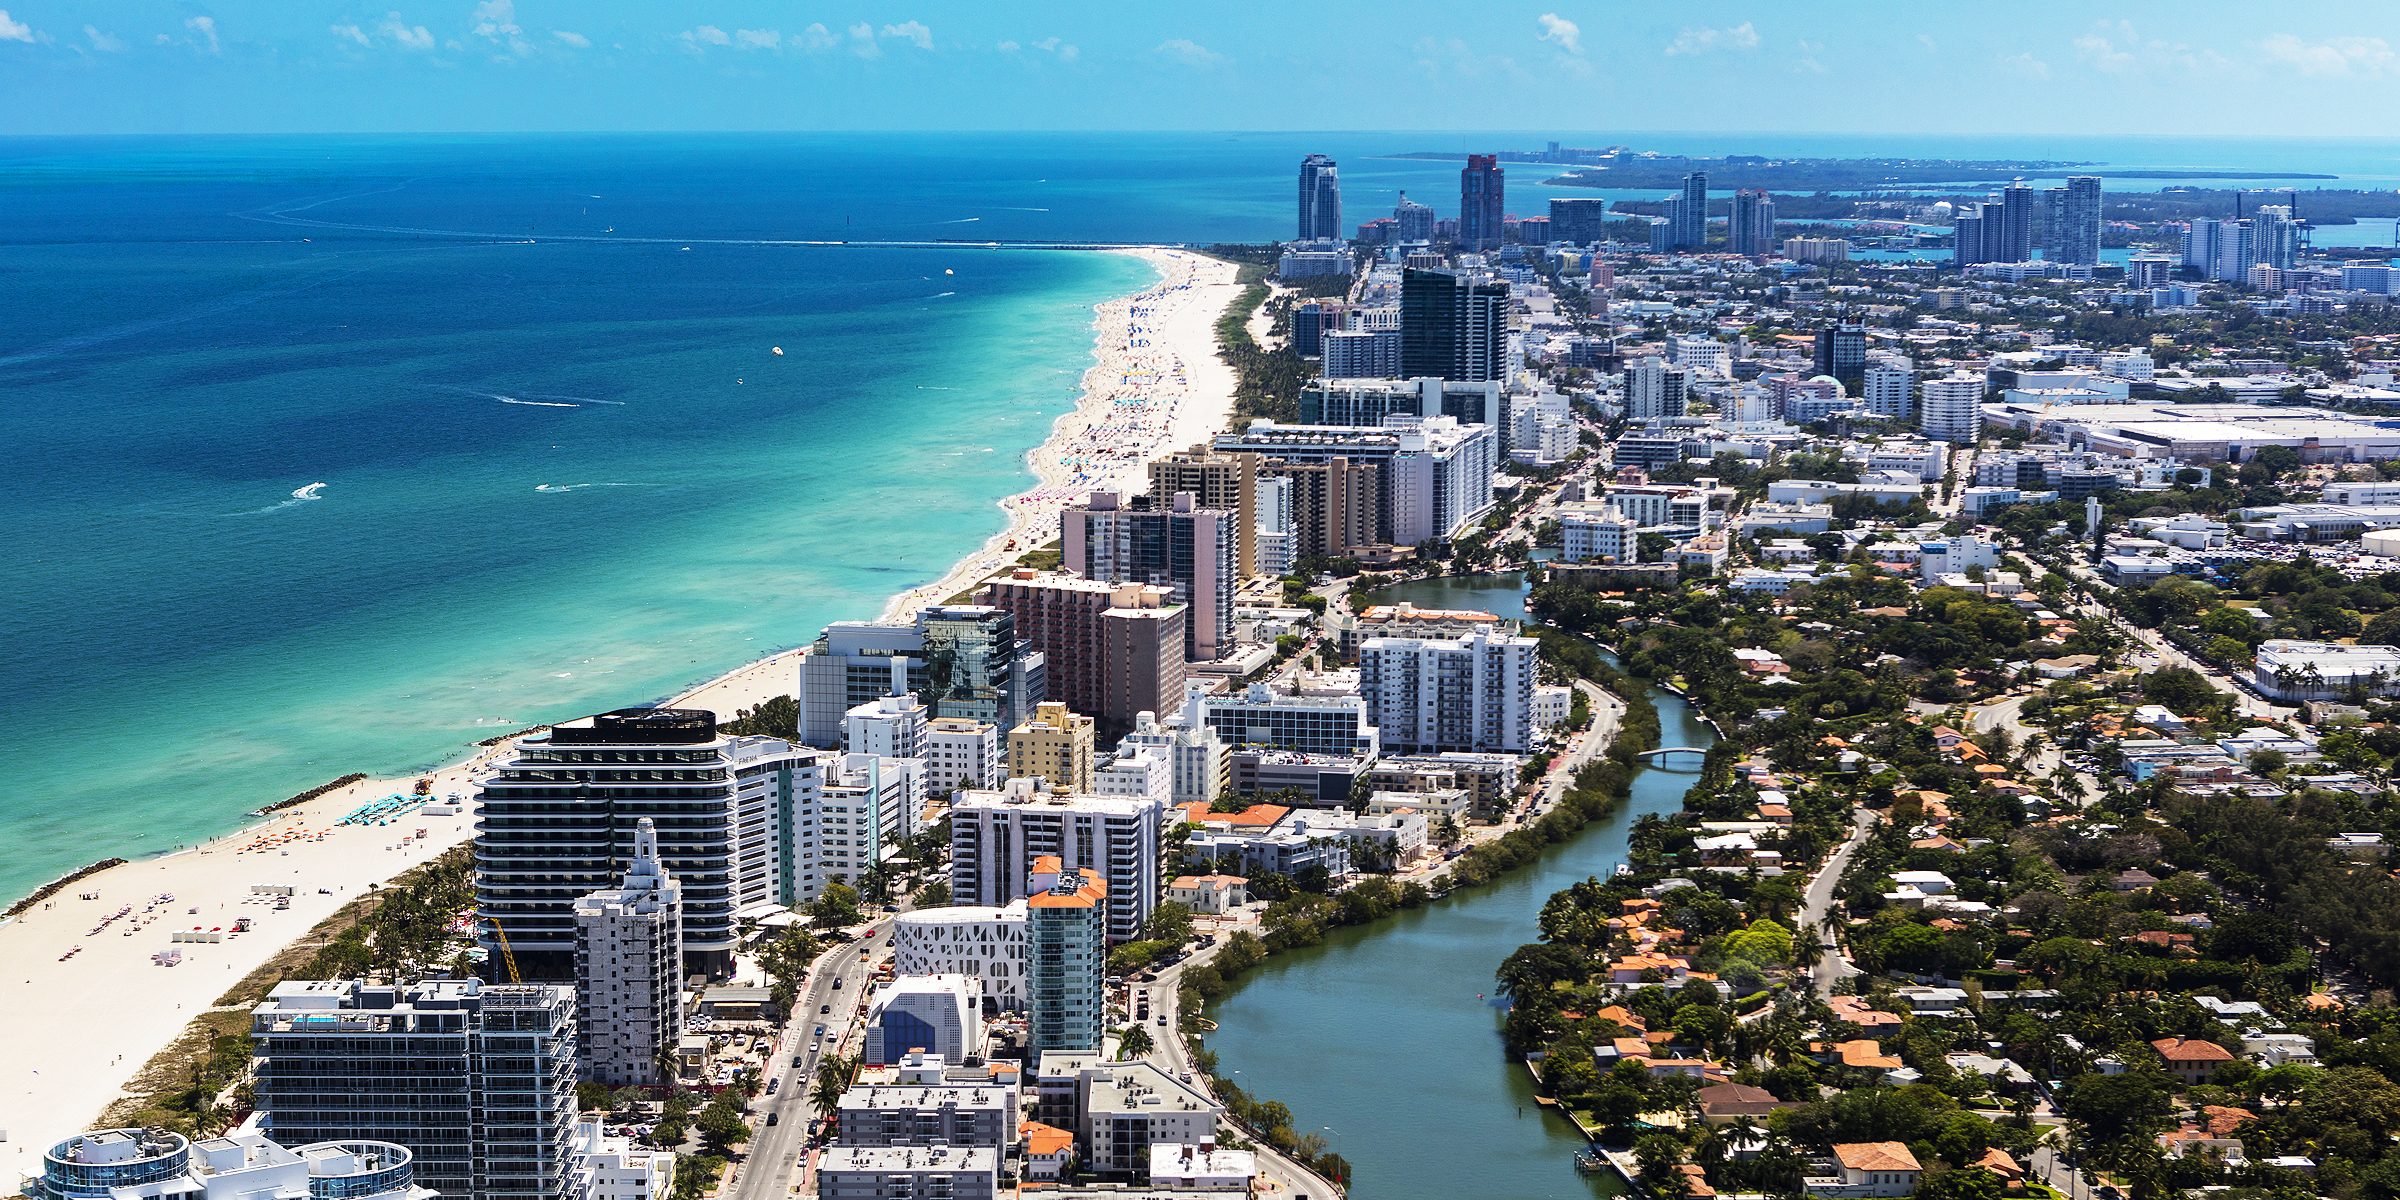 Aerial view of Florida | Source: Getty Images